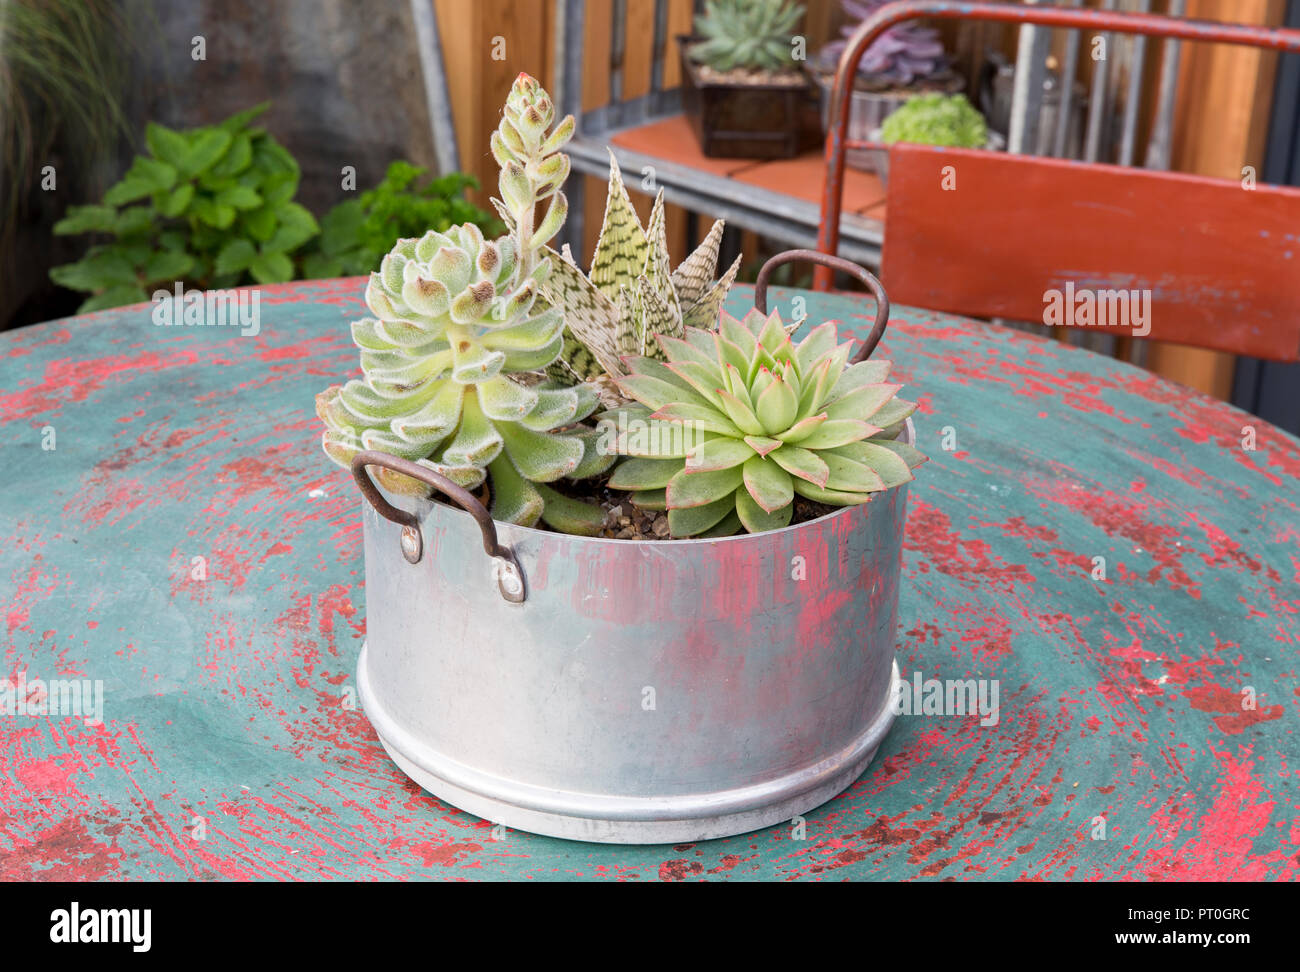 Garden with Cacti and Succulents and sempervivum plants grown in old repurposed recycled cooking pot pots unusual containers on outdoor table RHS UK Stock Photo